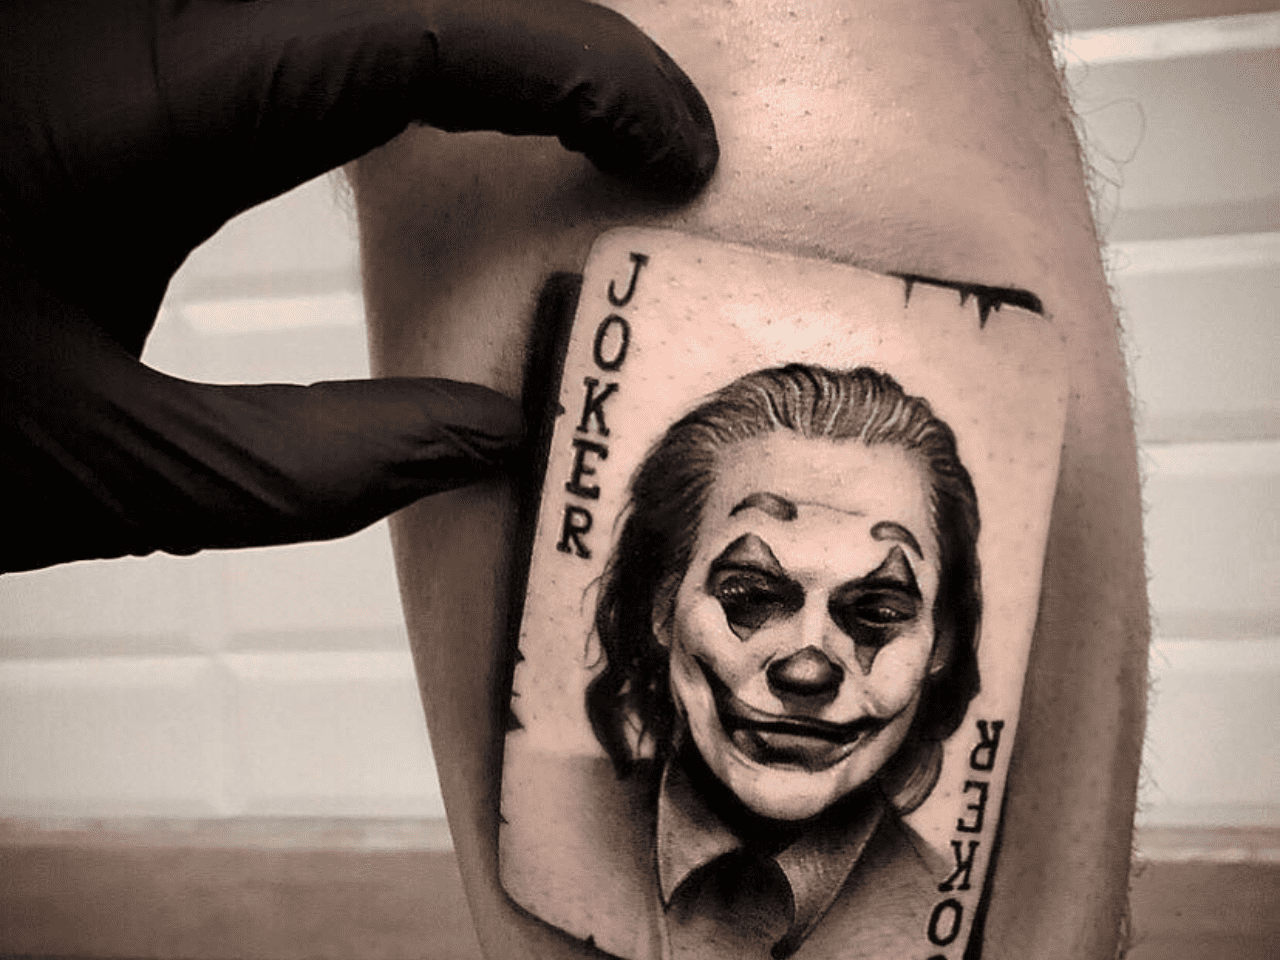 Joker Card Tattoo Meaning: Symbolism and Significance Explained